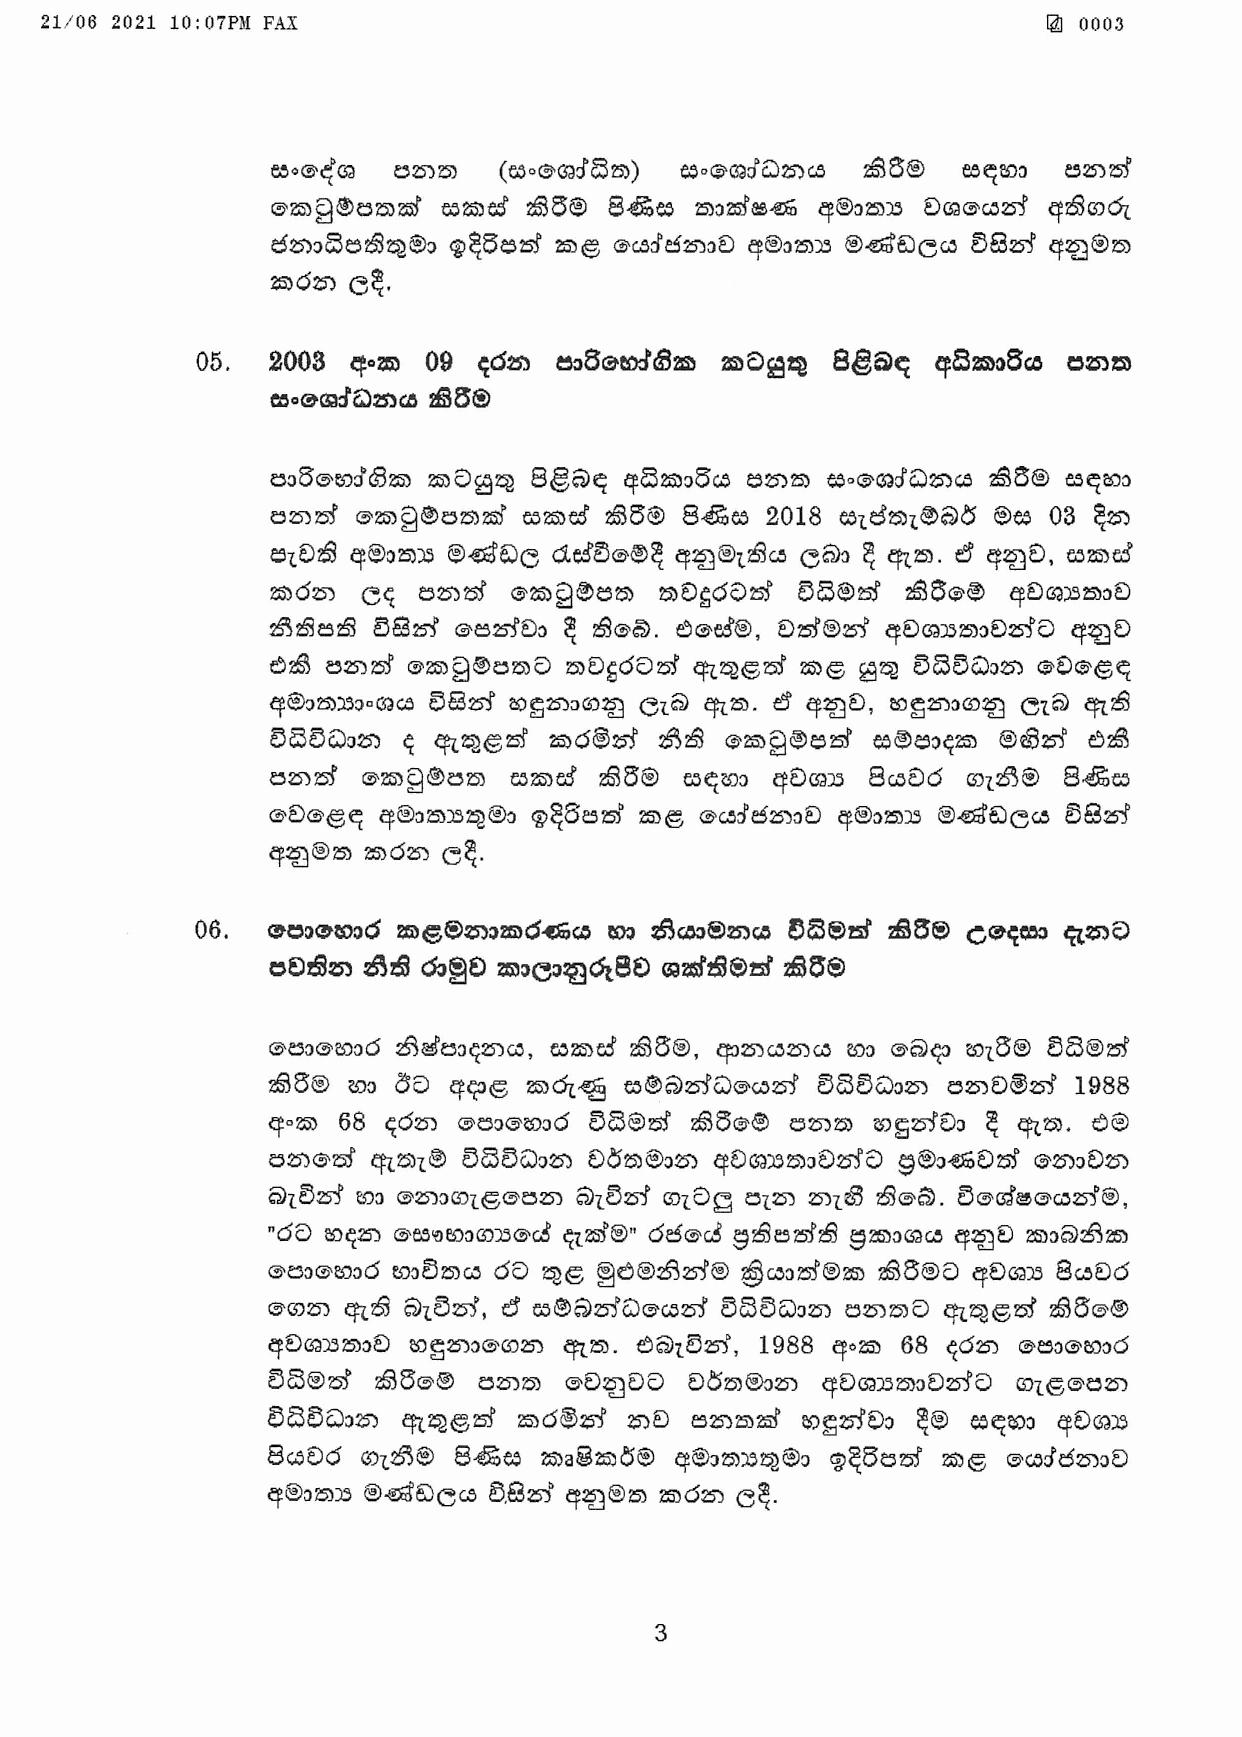 Cabinet Decision on 21.06.2021 page 003